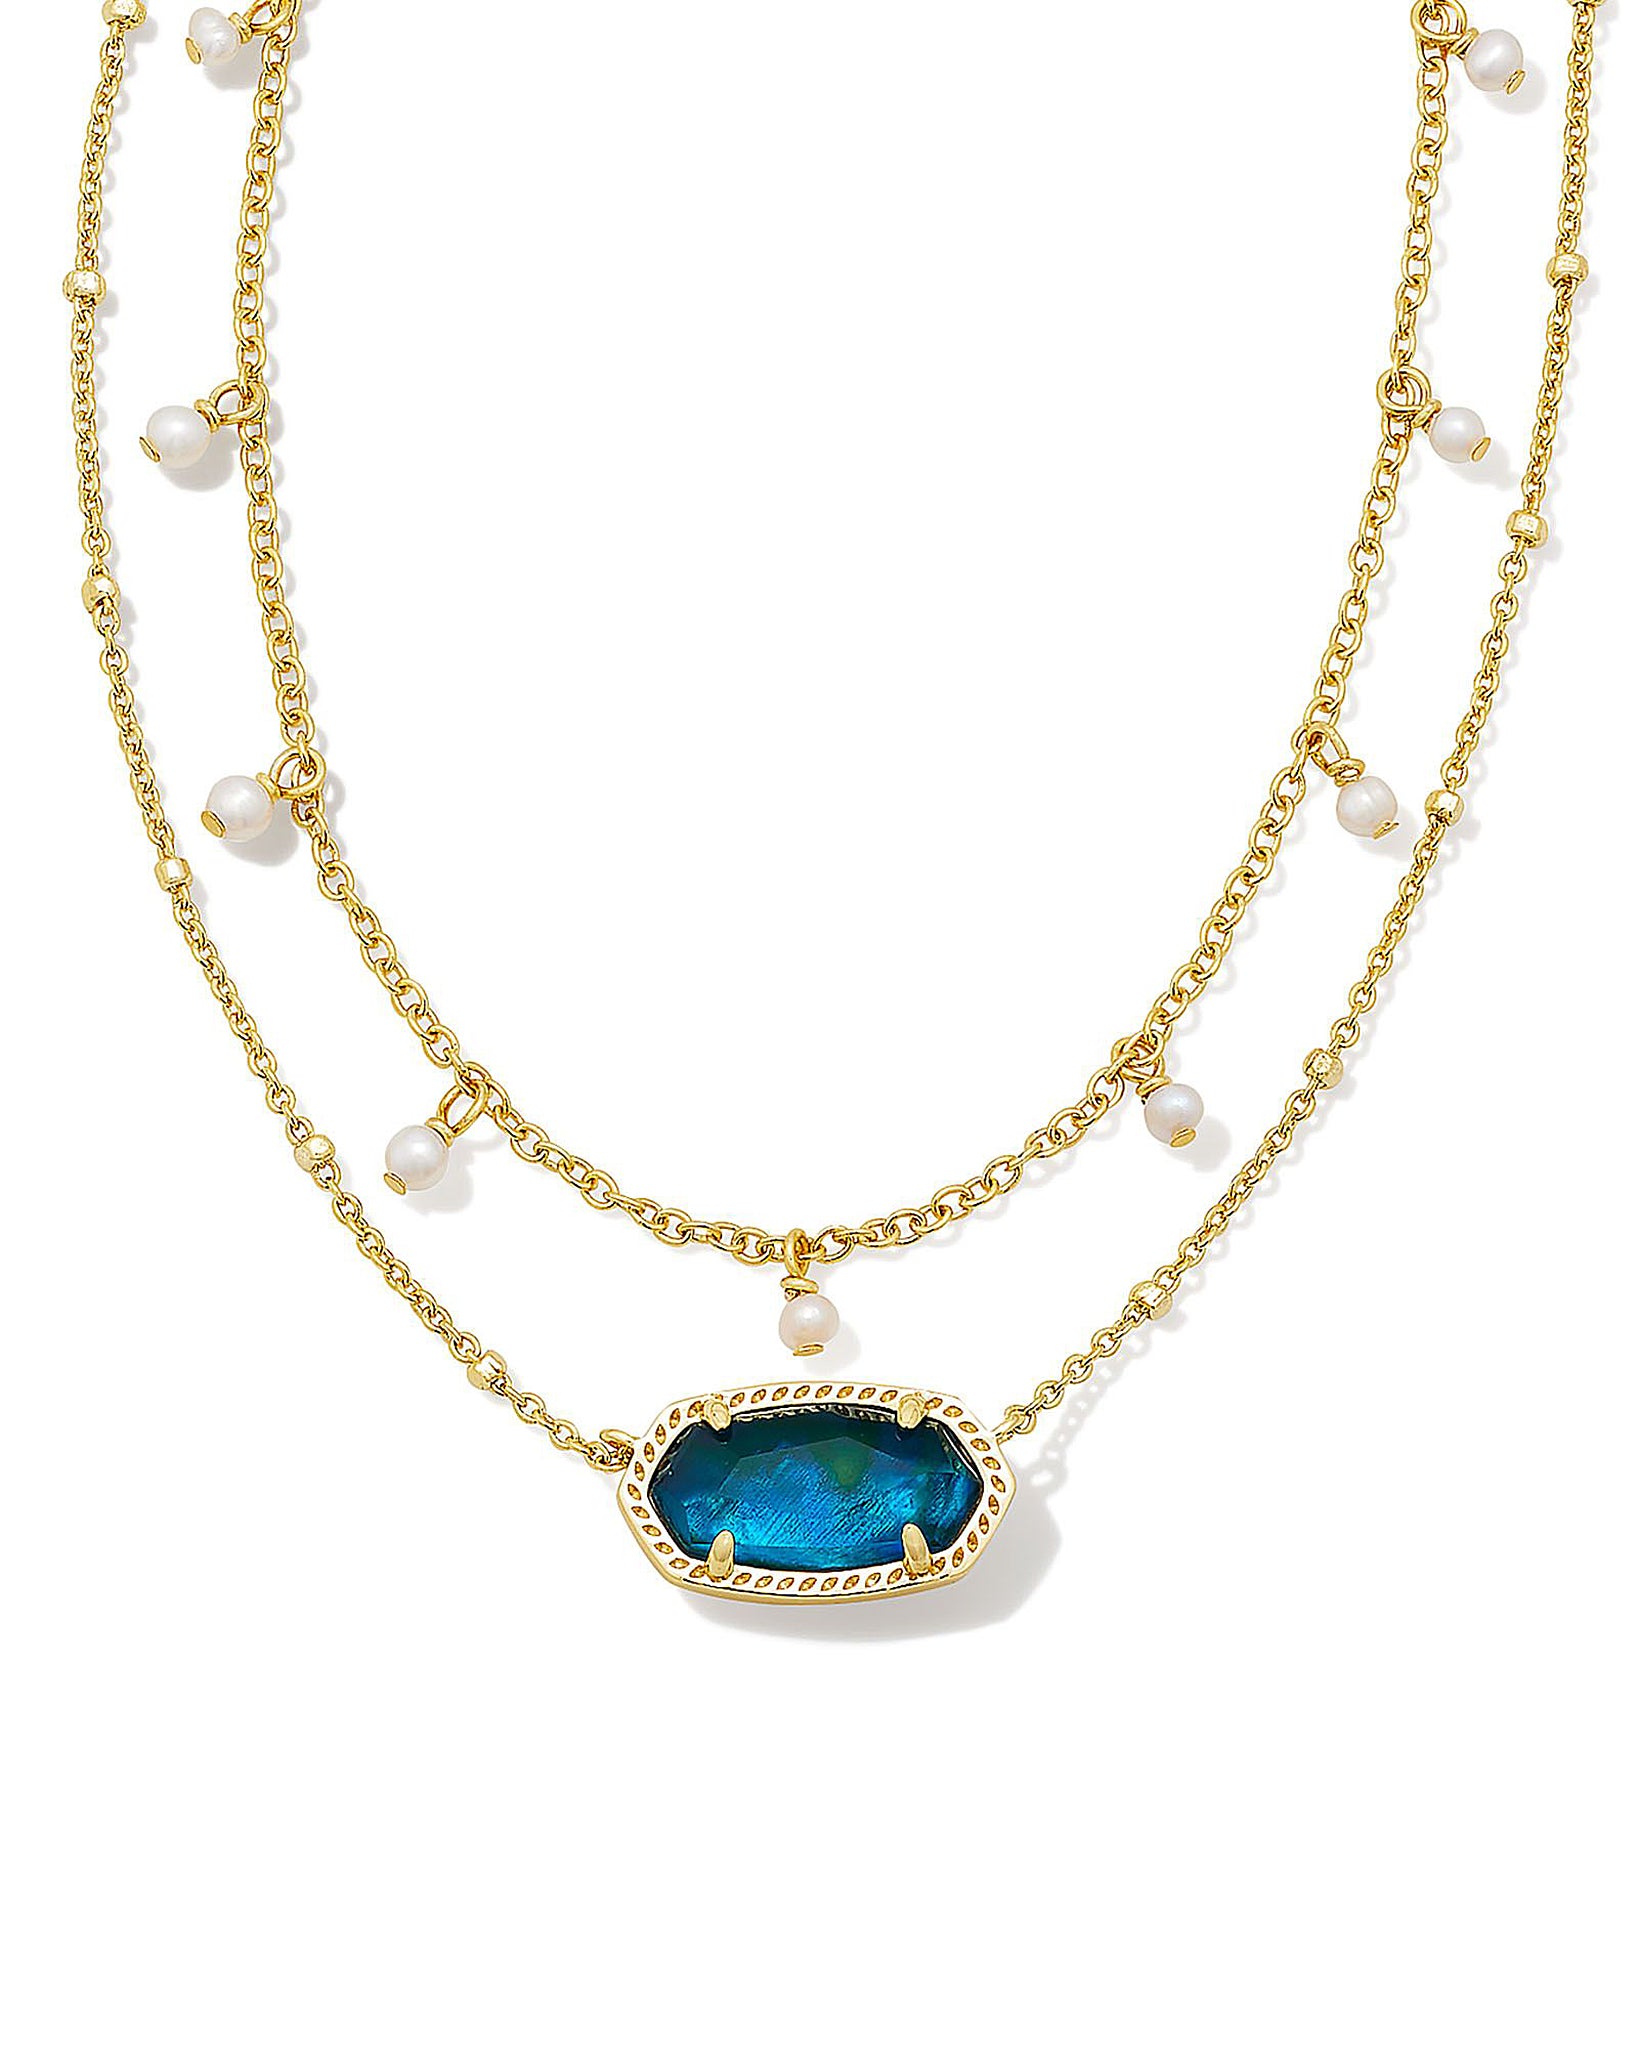 Kendra Scott Elisa Multi Strand Pearl Pendant Necklace in Teal Abalone and Gold